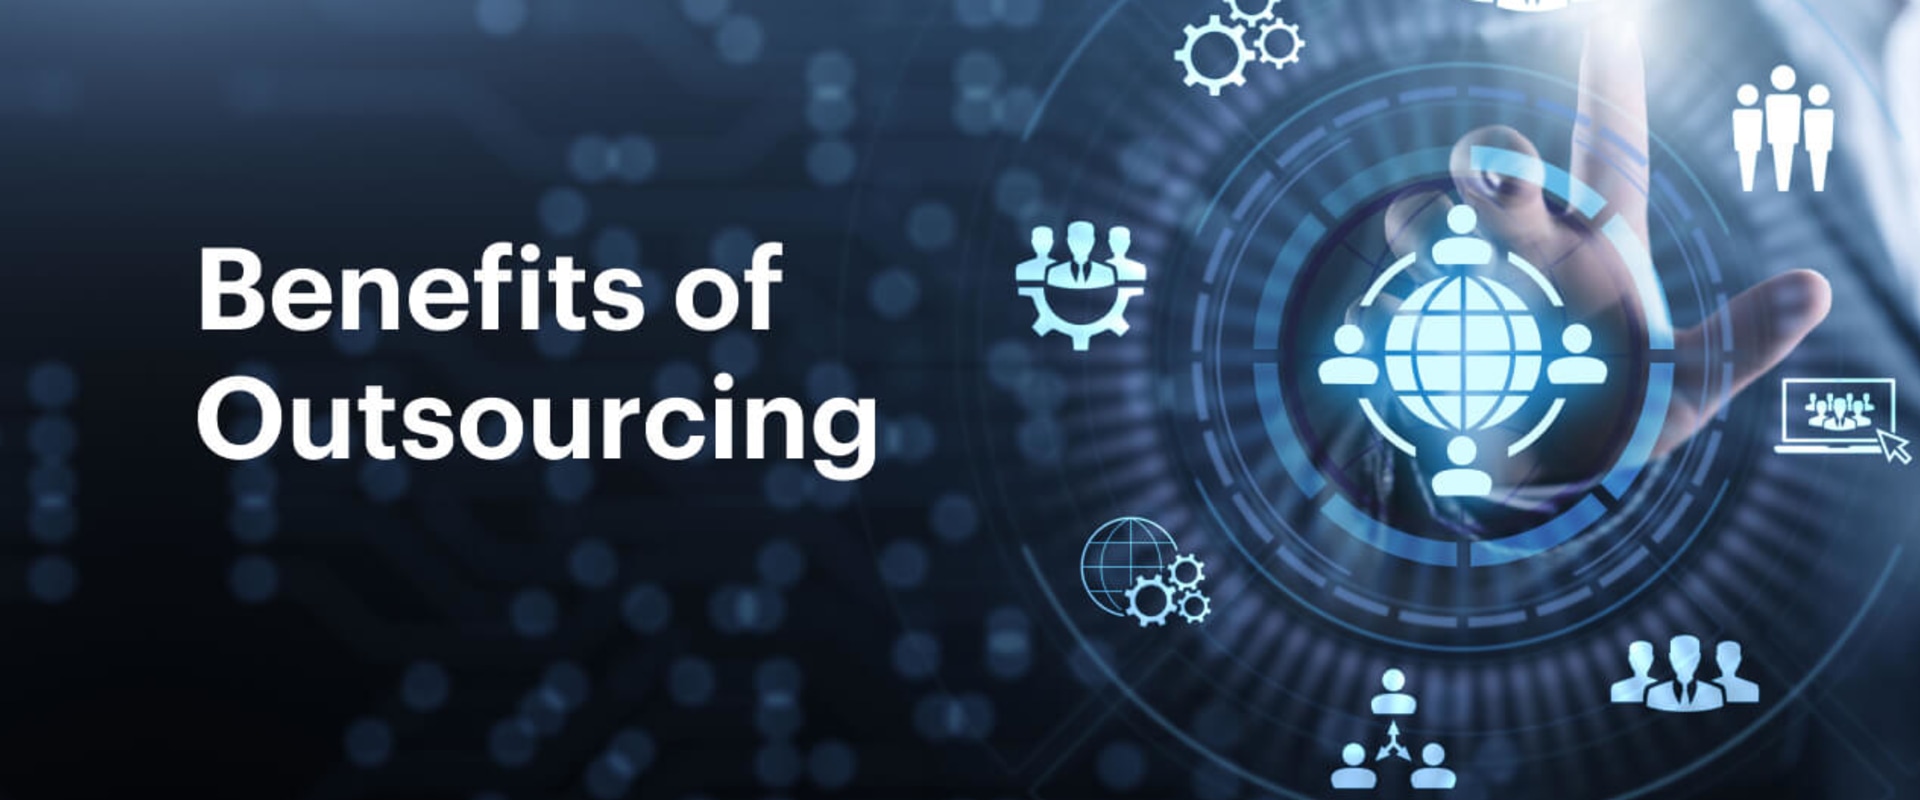 The Top 5 Benefits of Outsourcing Your IT Needs to a Managed Service Provider